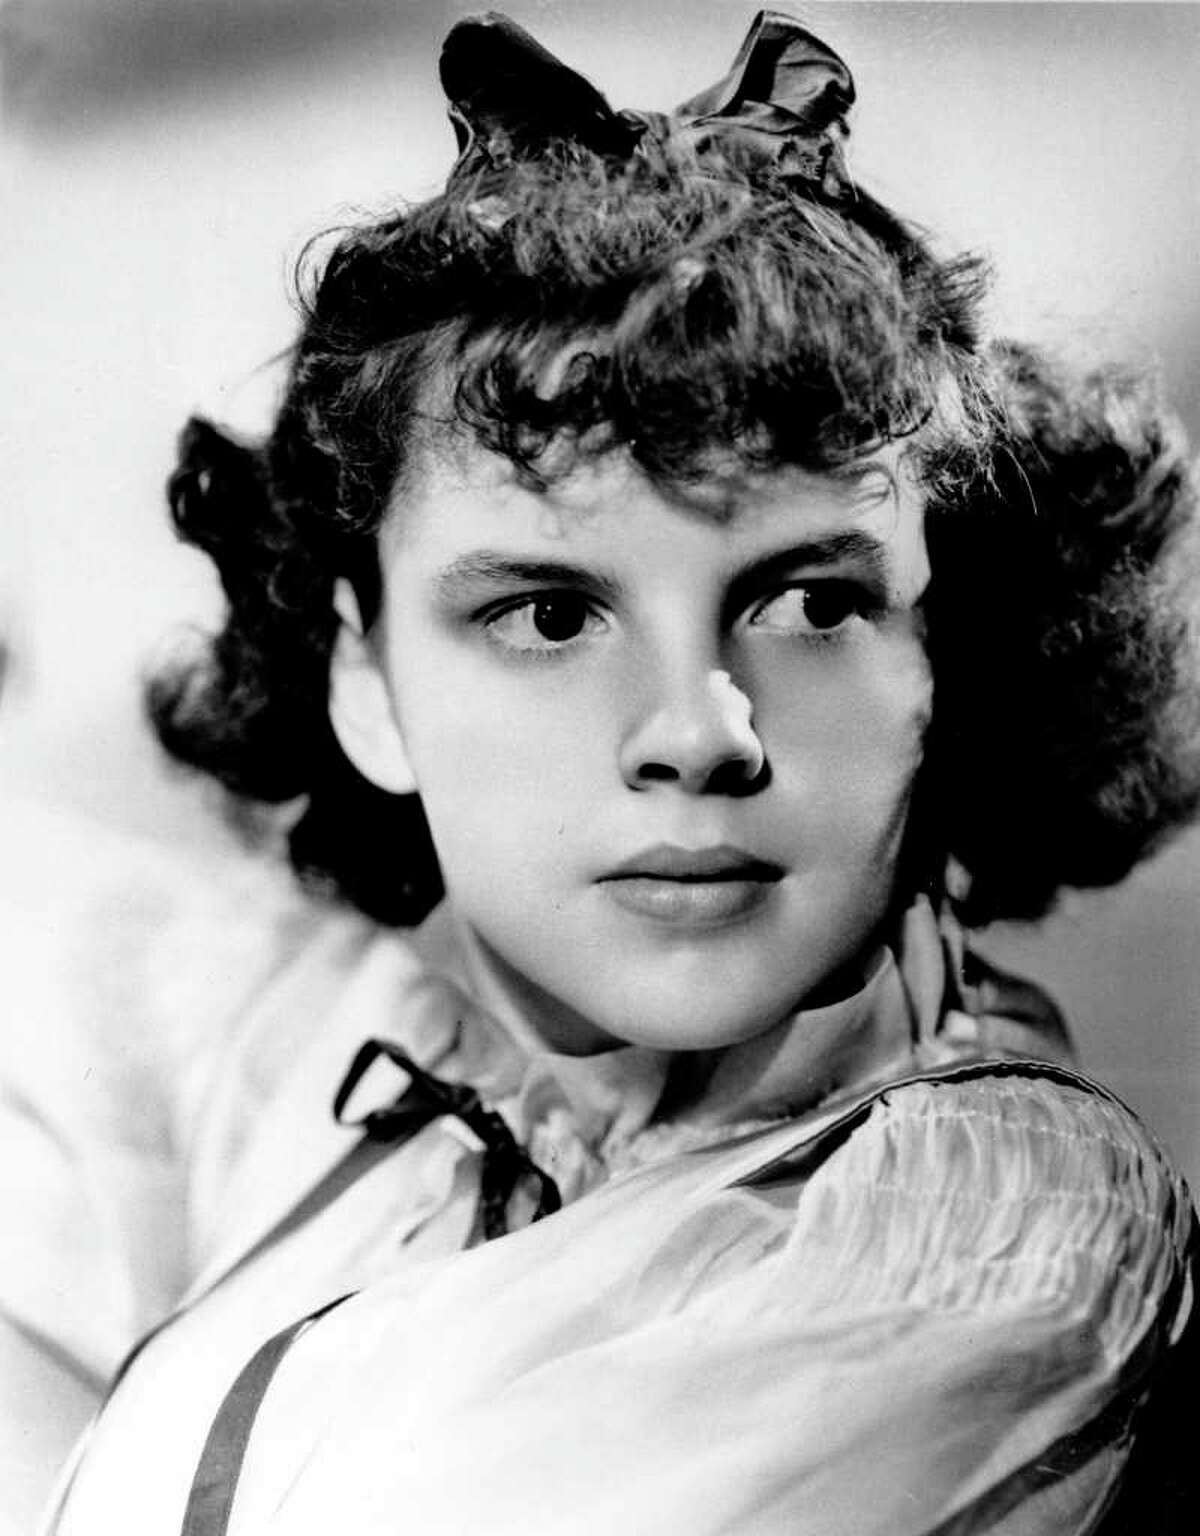 There's no one like Judy Garland